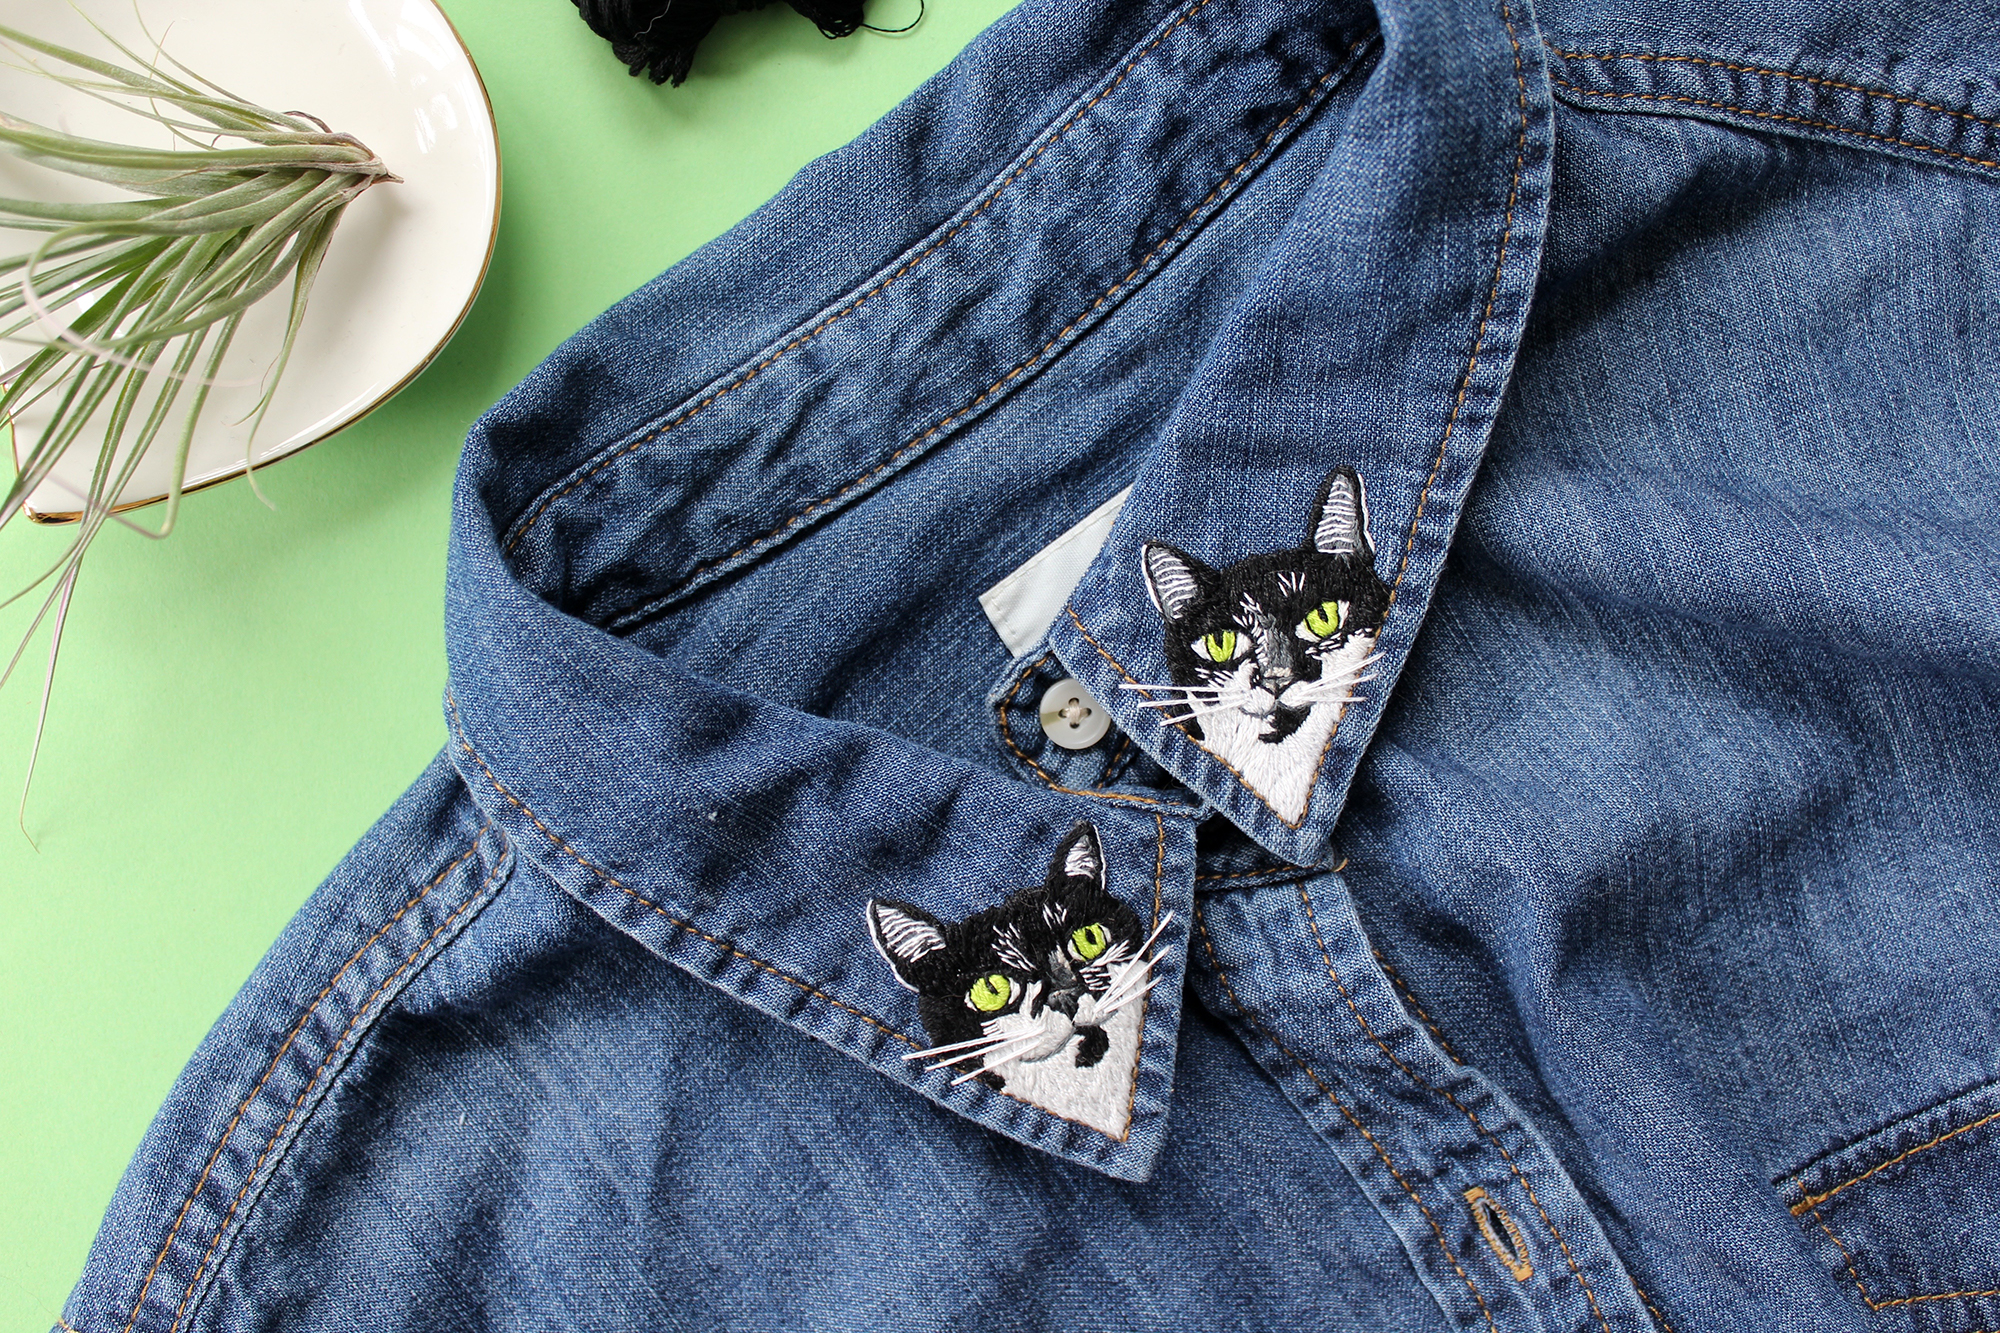 Embroidered collars with cats on them